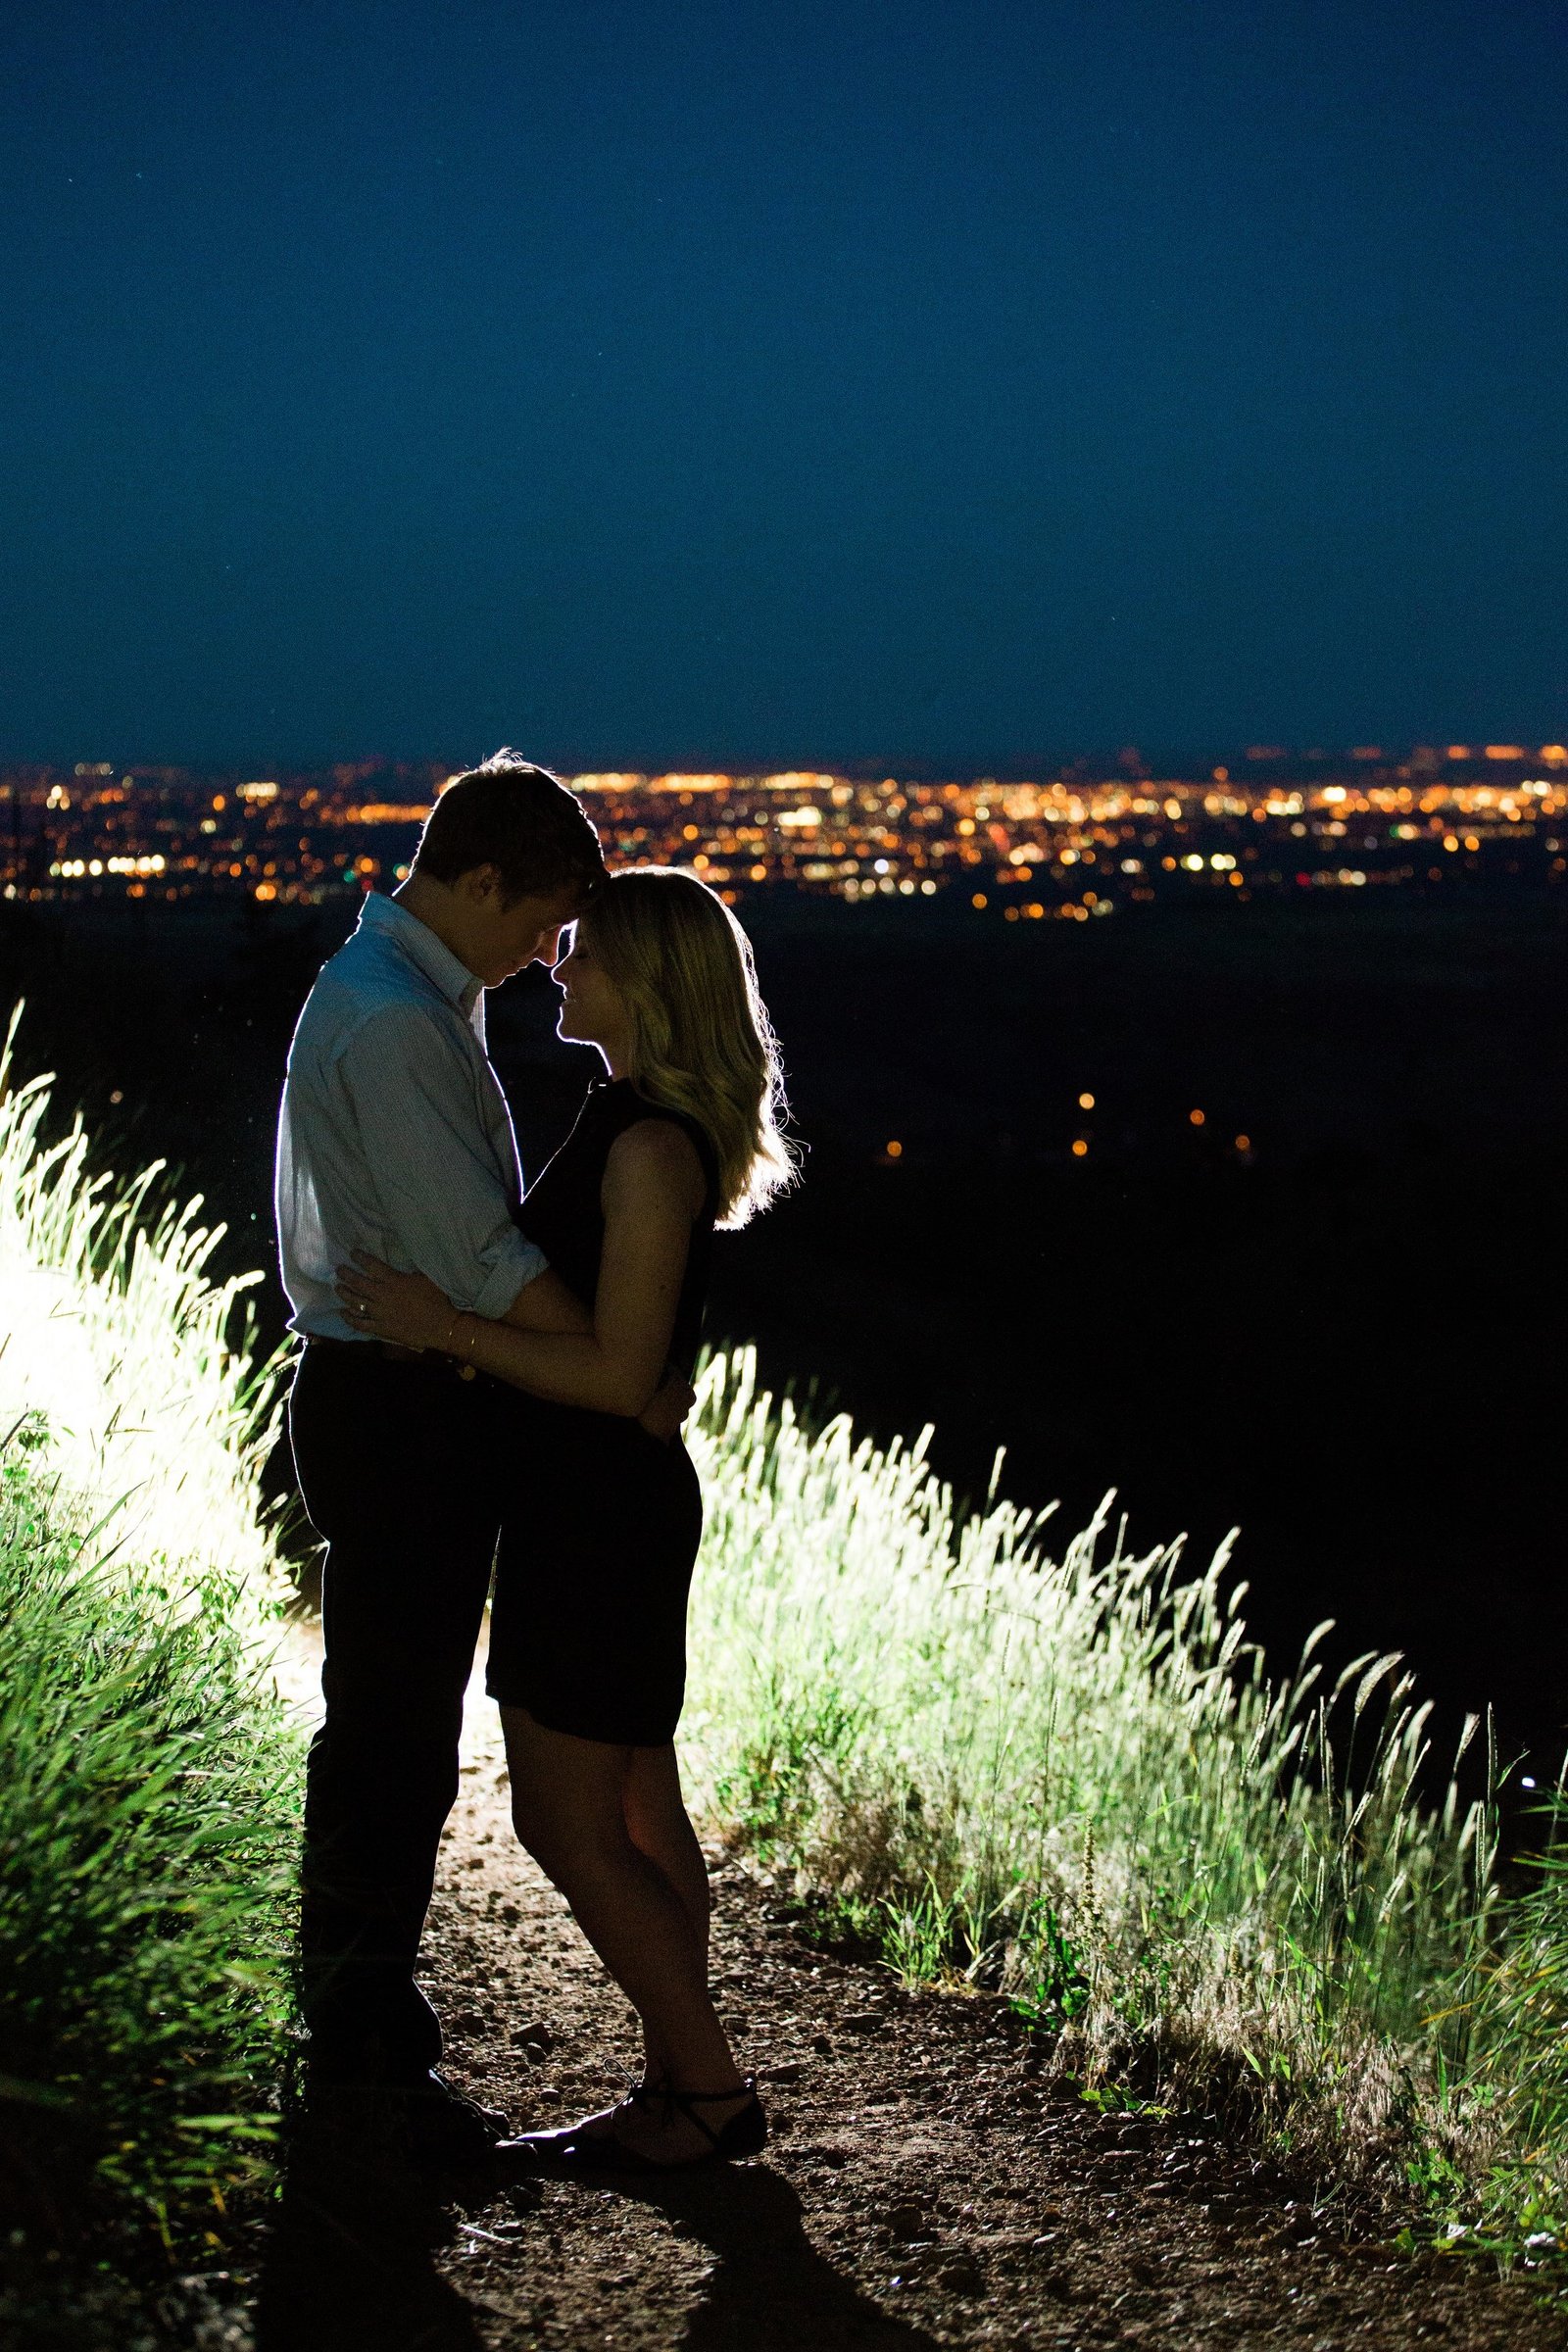 Engagements -Denver Lookout Mountain Engagement Session Golden Colorado Wedding Photographer Overlook City Lights Nature Outdoors Valley Light Couple (2)